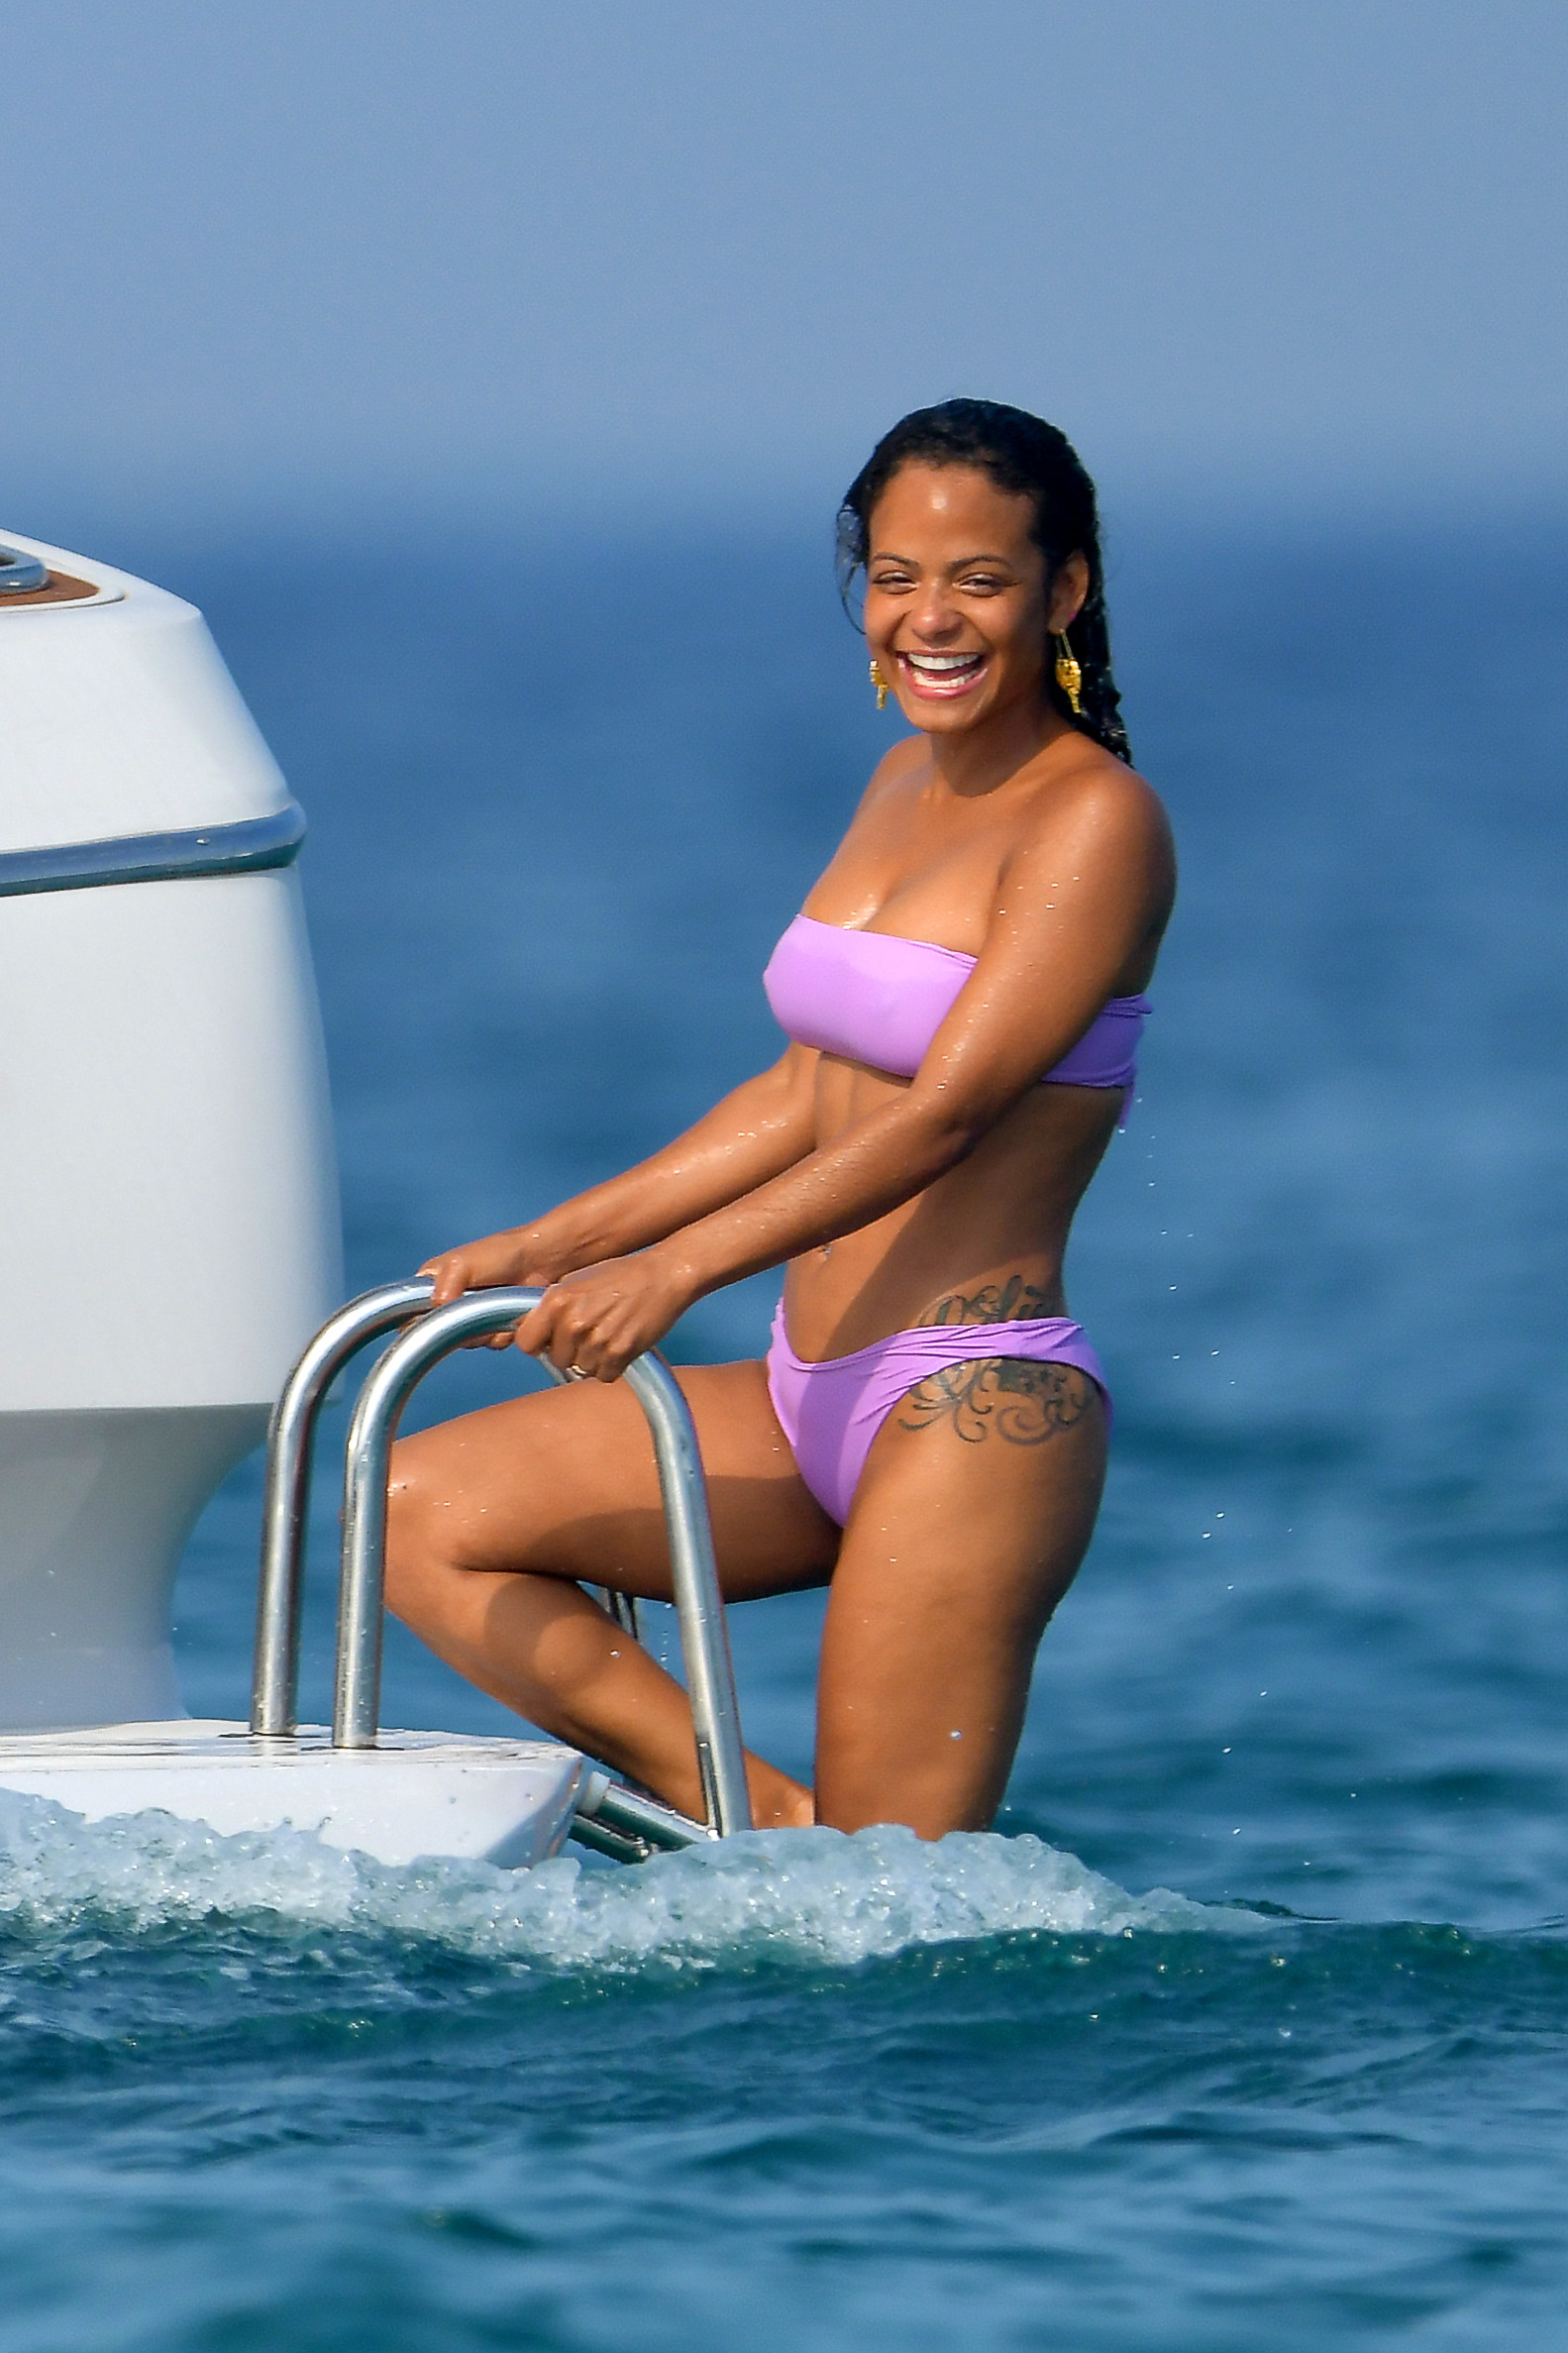 Christina Milian pokies and cameltoe in sexy bikini candids on a boat during holiday UHQ (39).jpg